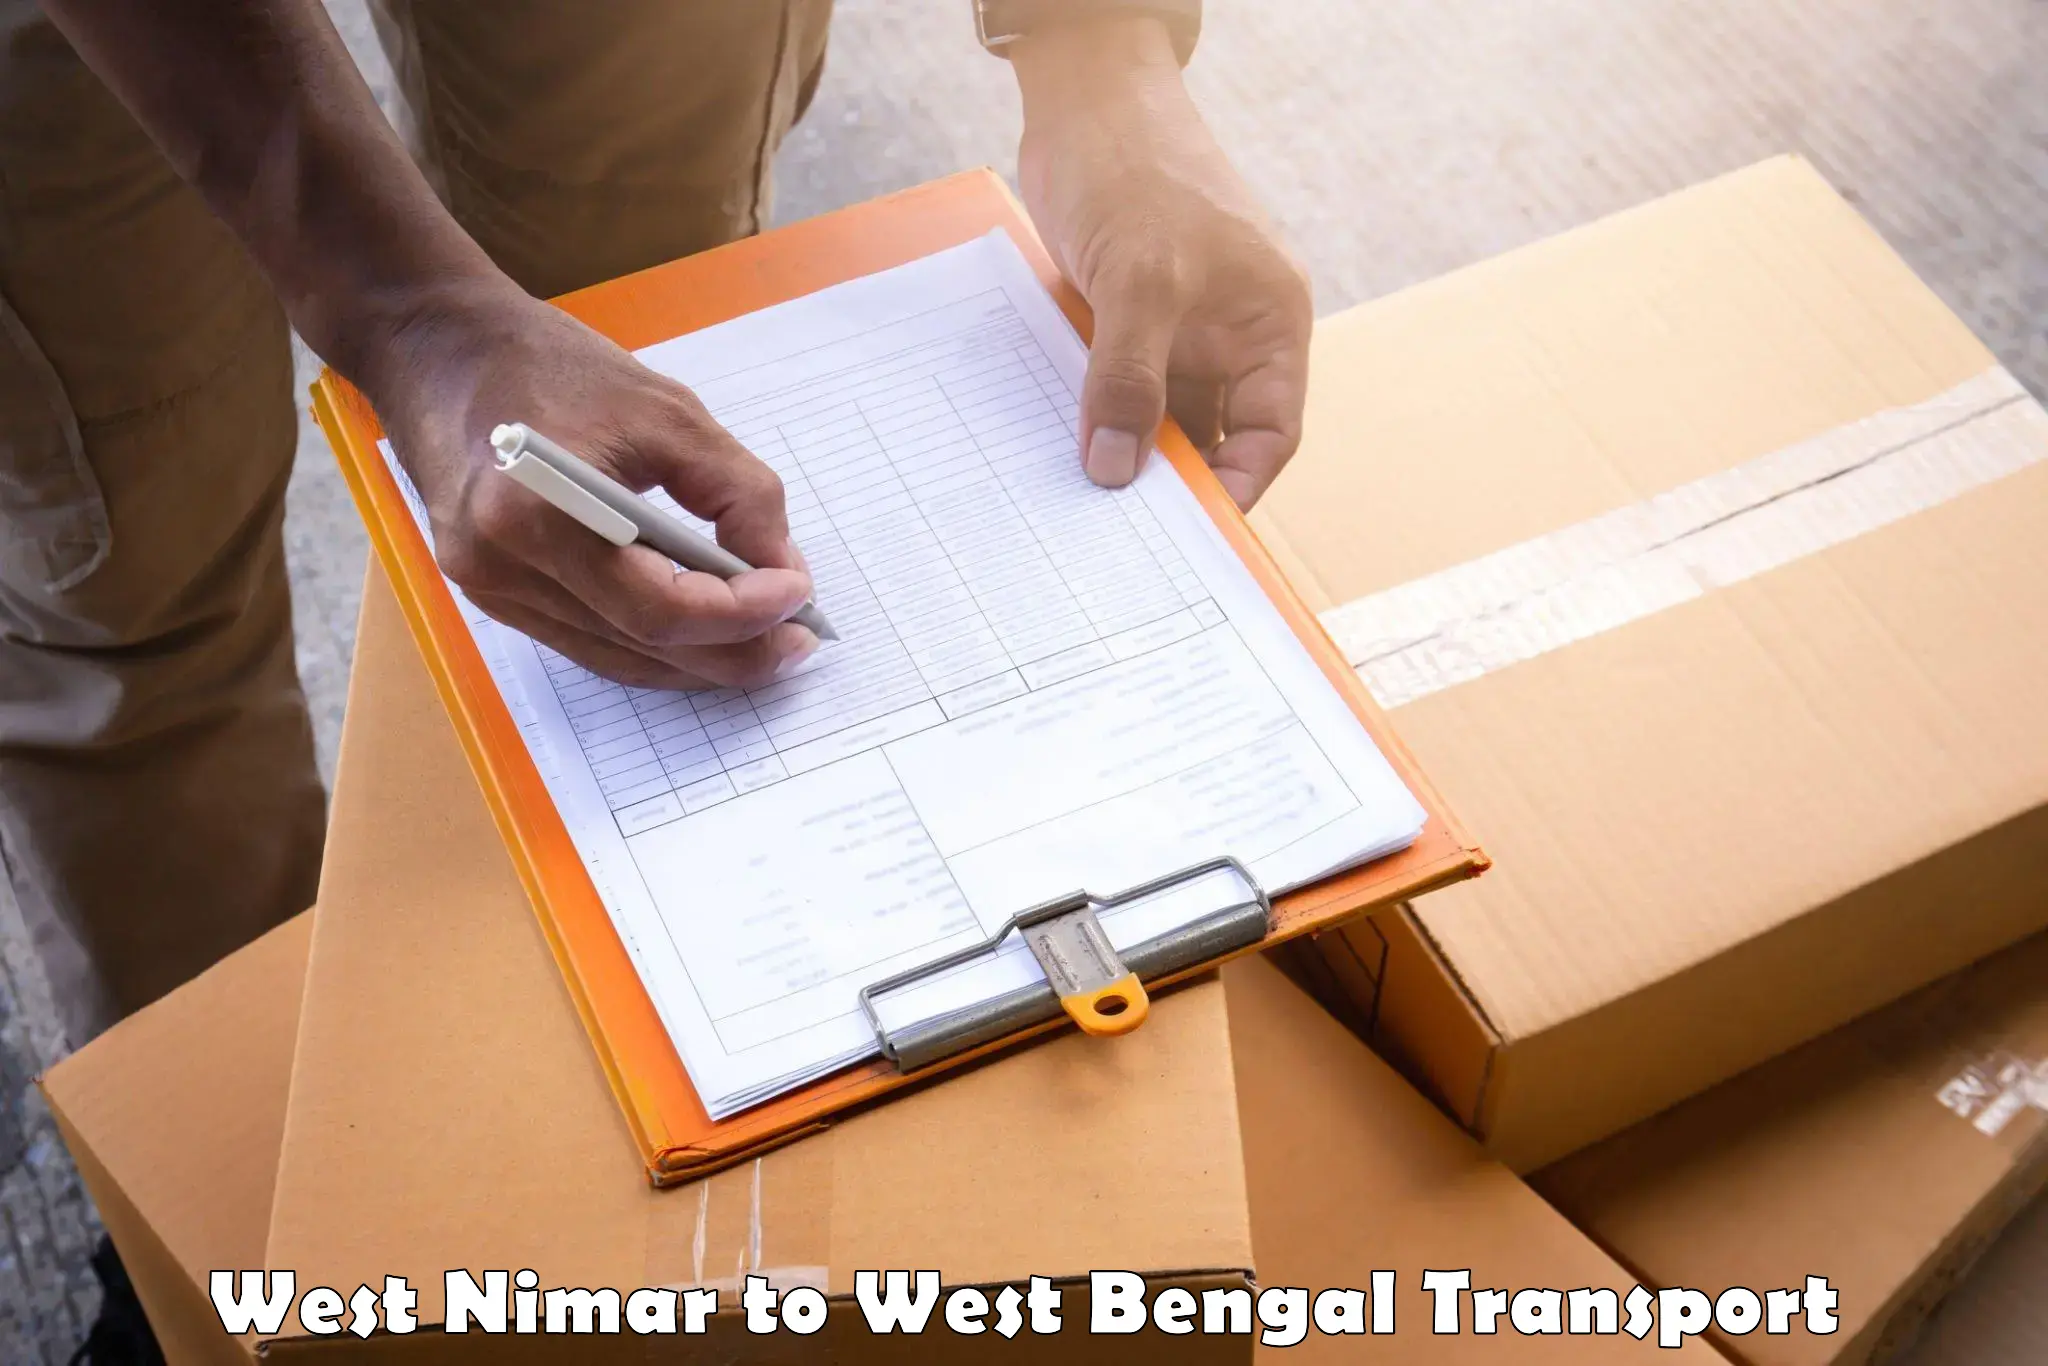 Container transport service West Nimar to Mungpoo